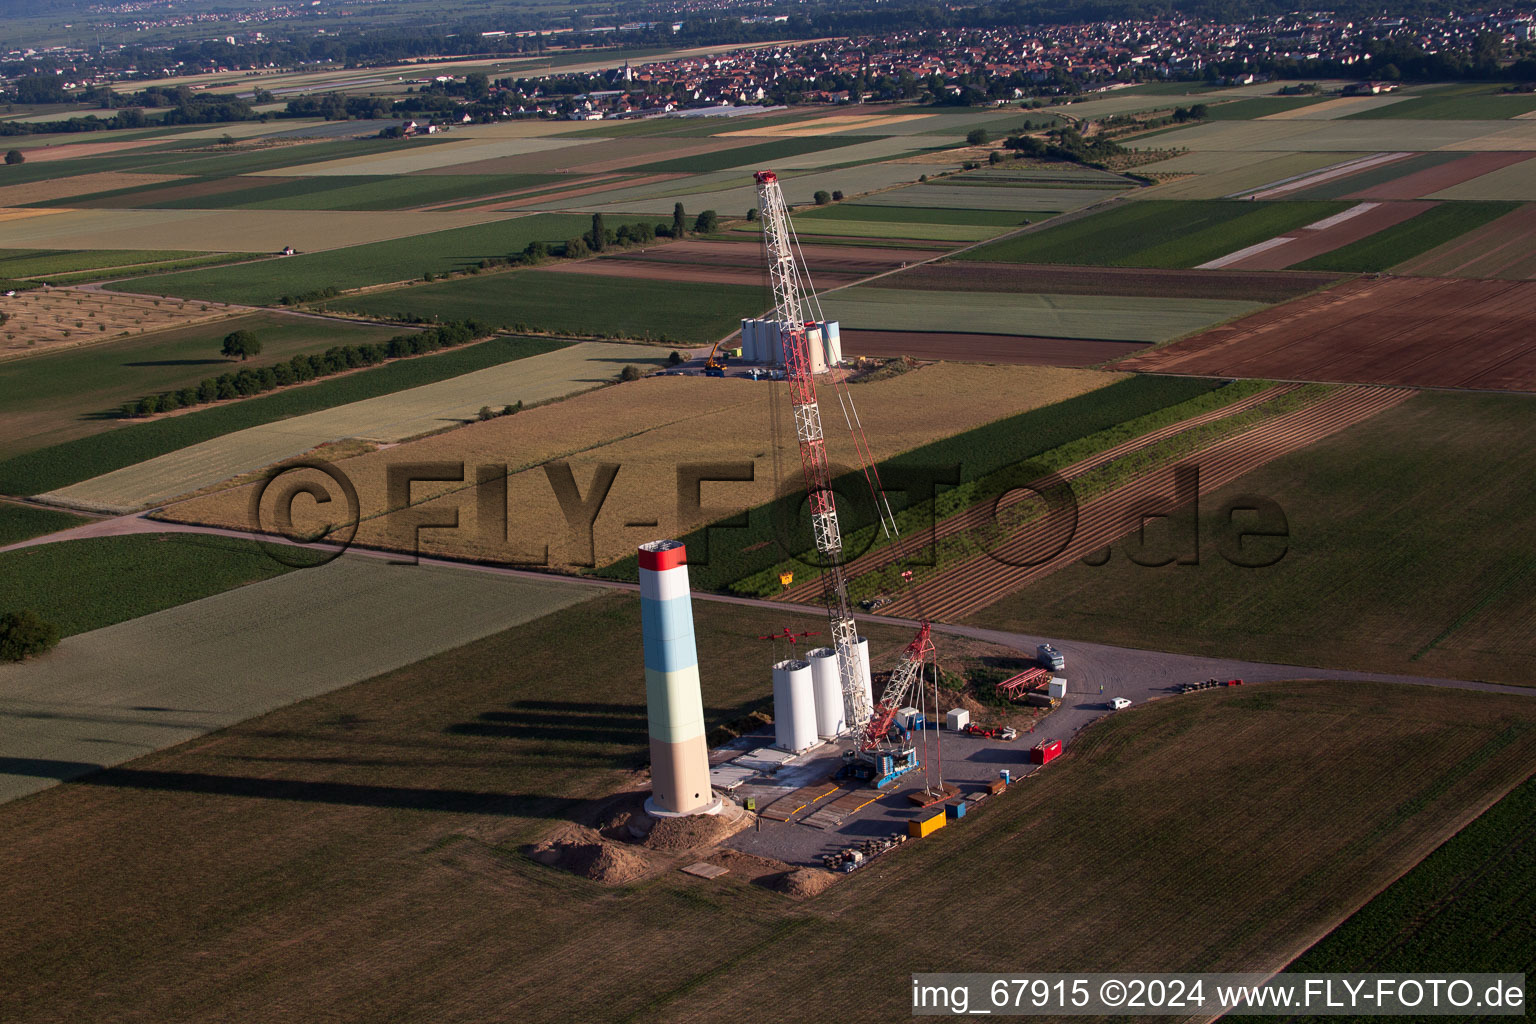 Bird's eye view of New wind farm in Offenbach an der Queich in the state Rhineland-Palatinate, Germany